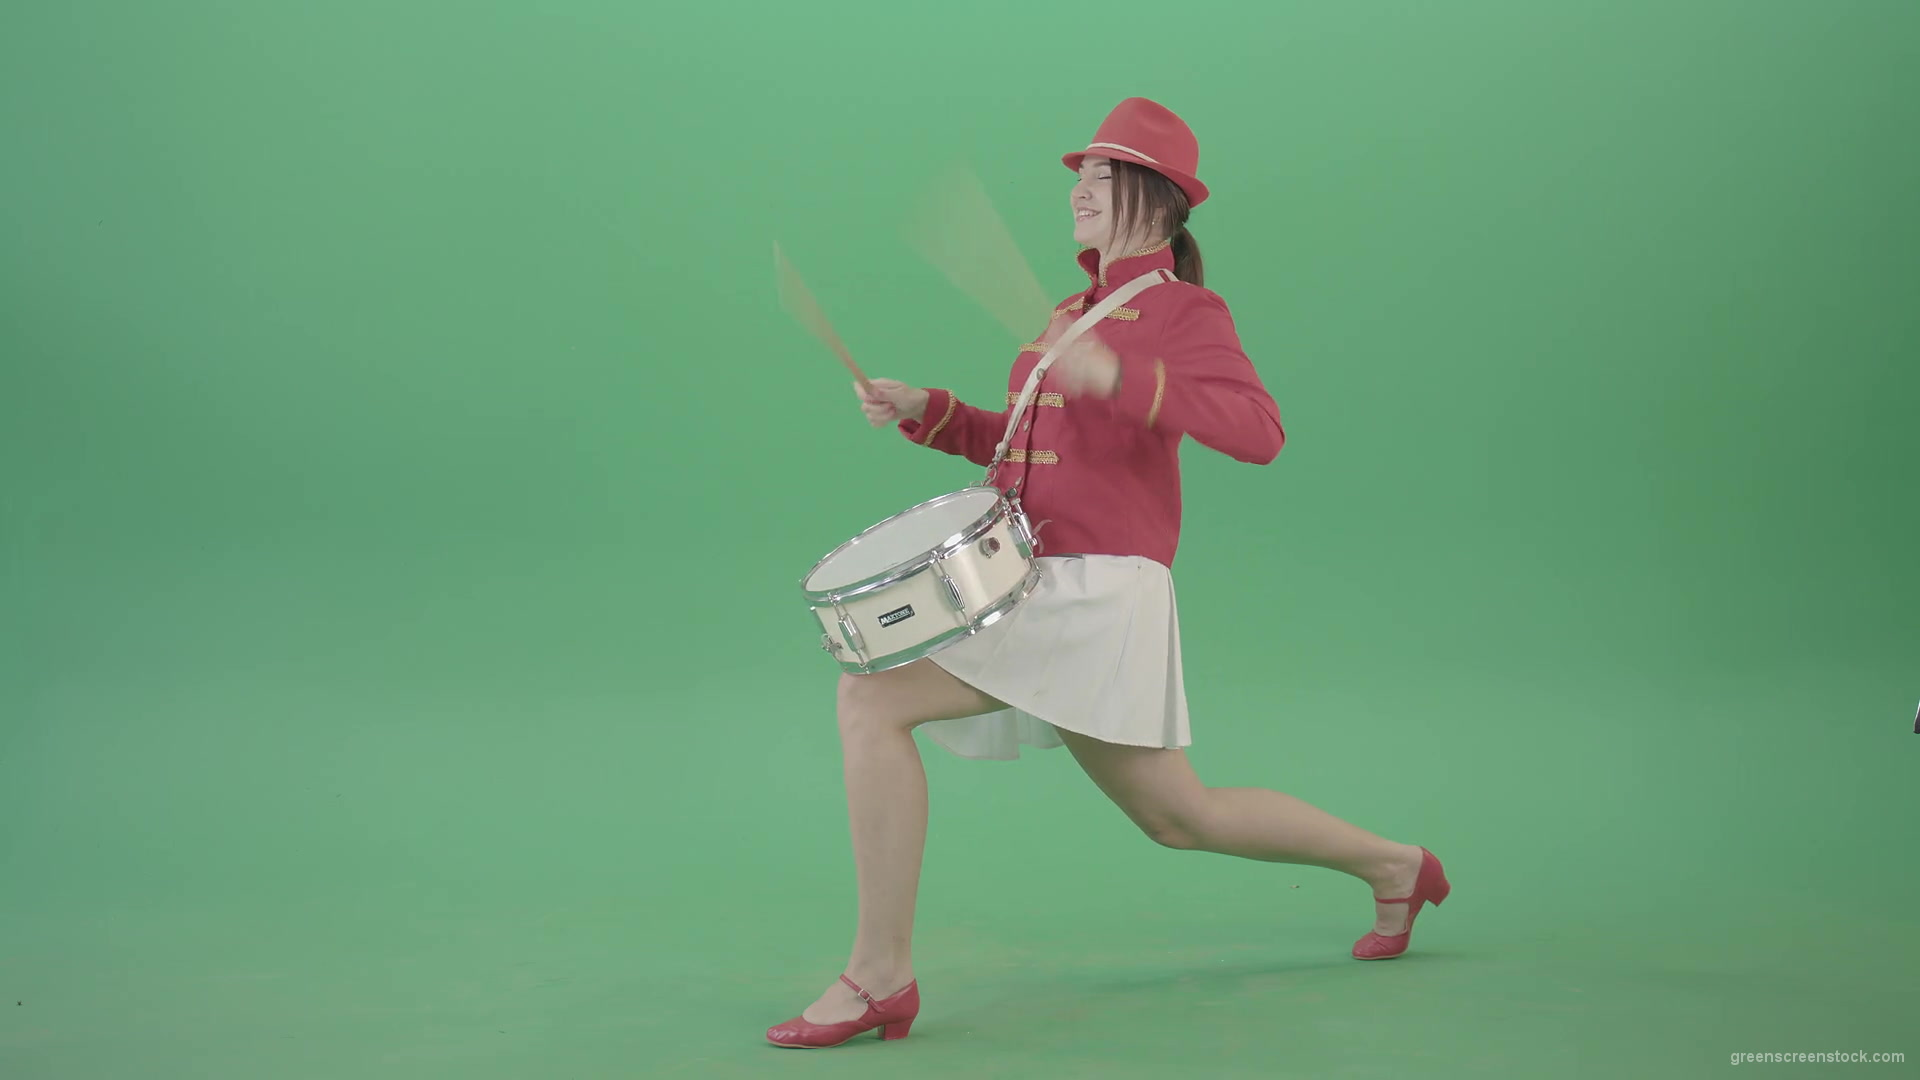 Stupid-funny-advertising-video-footage-with-drumming-girl-isolated-on-green-screen-4K-Video-Footage-1920_006 Green Screen Stock